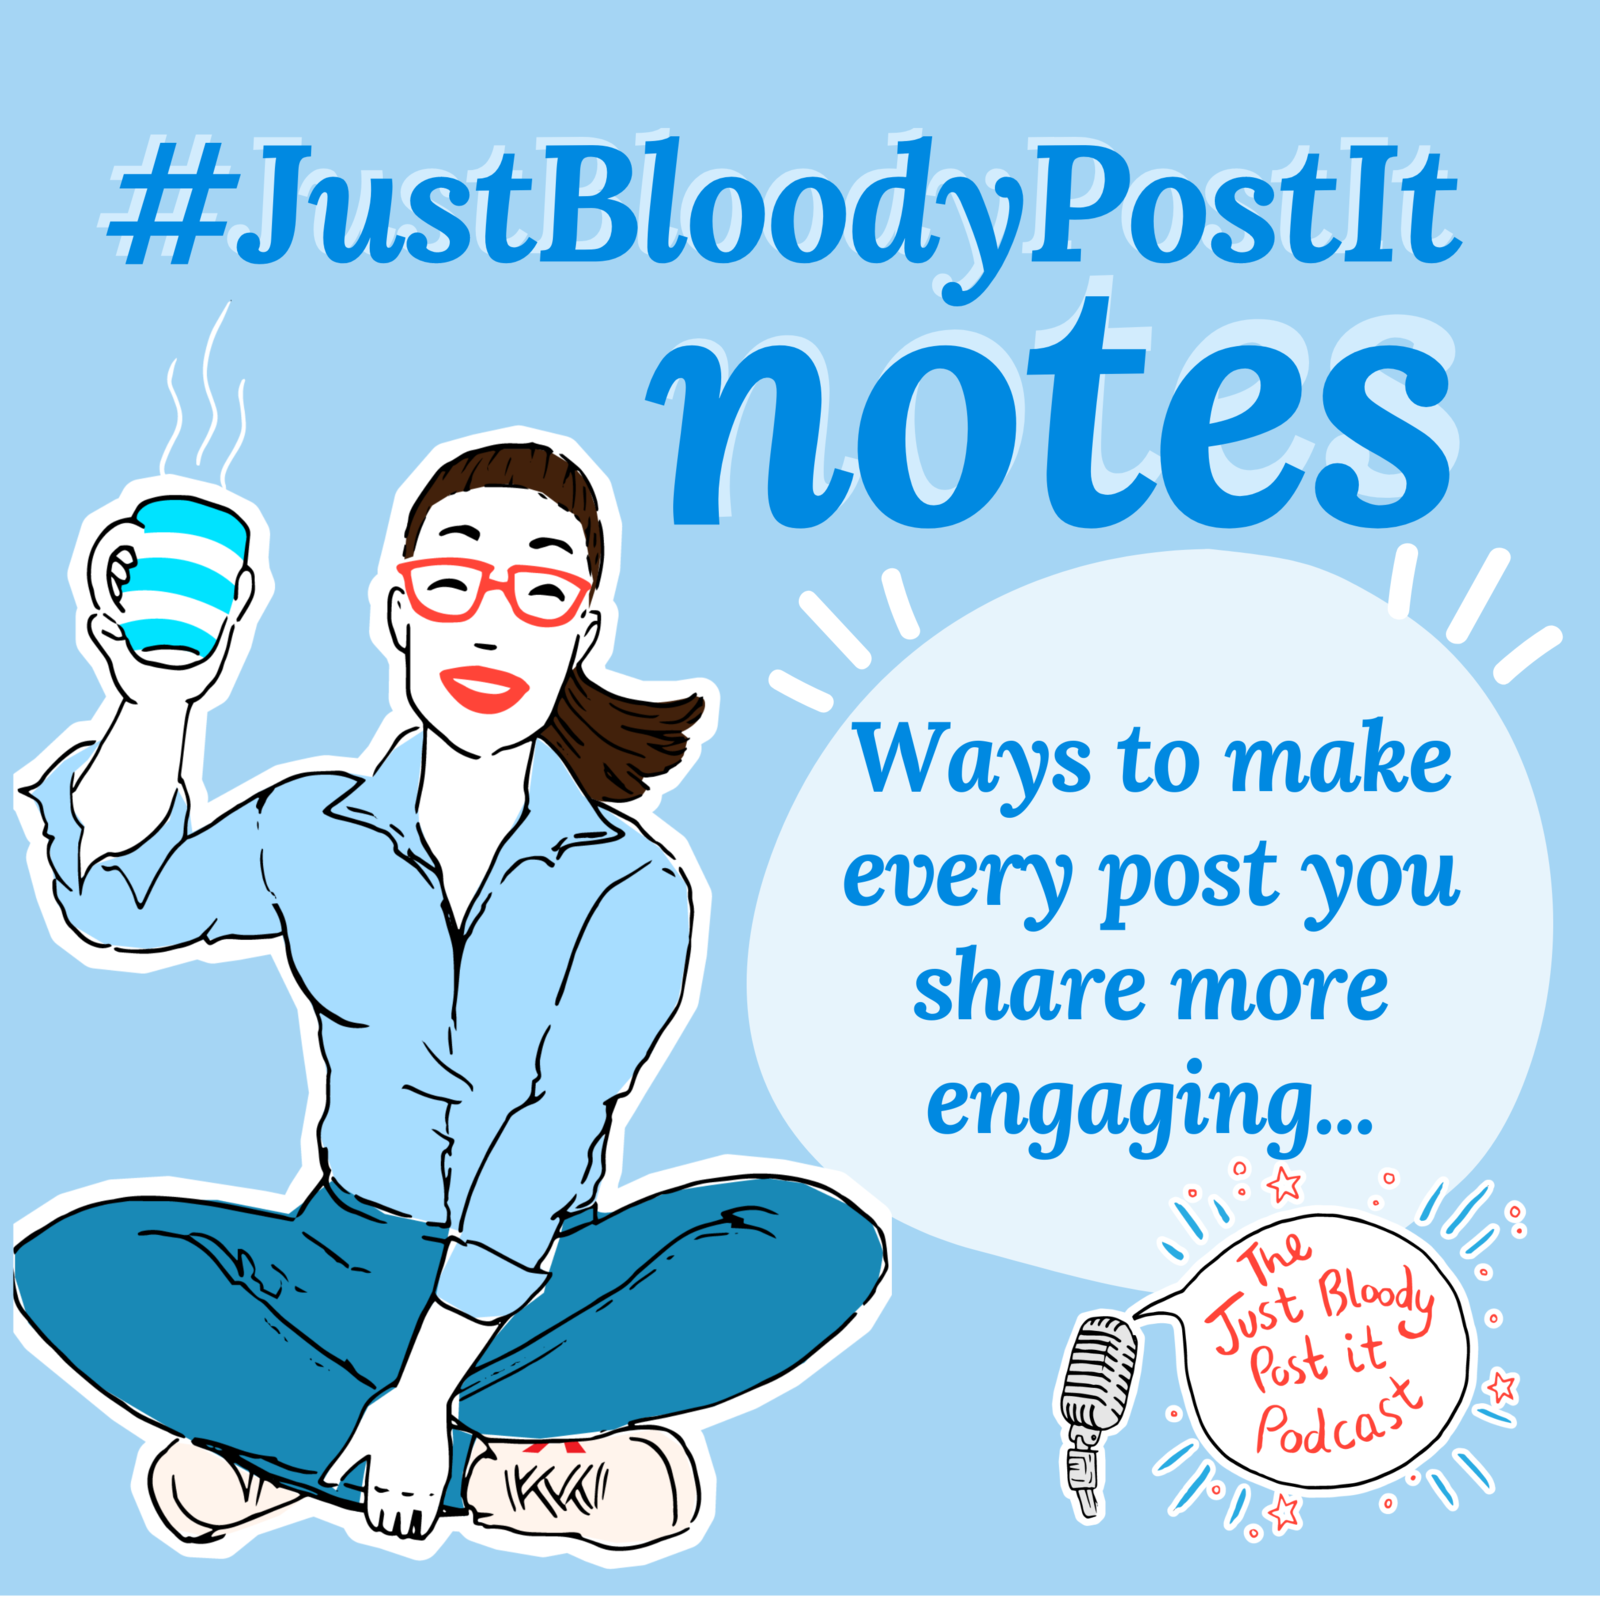 S2 Ep35: #JustBloodyPostIt Note: how to make every post more engaging